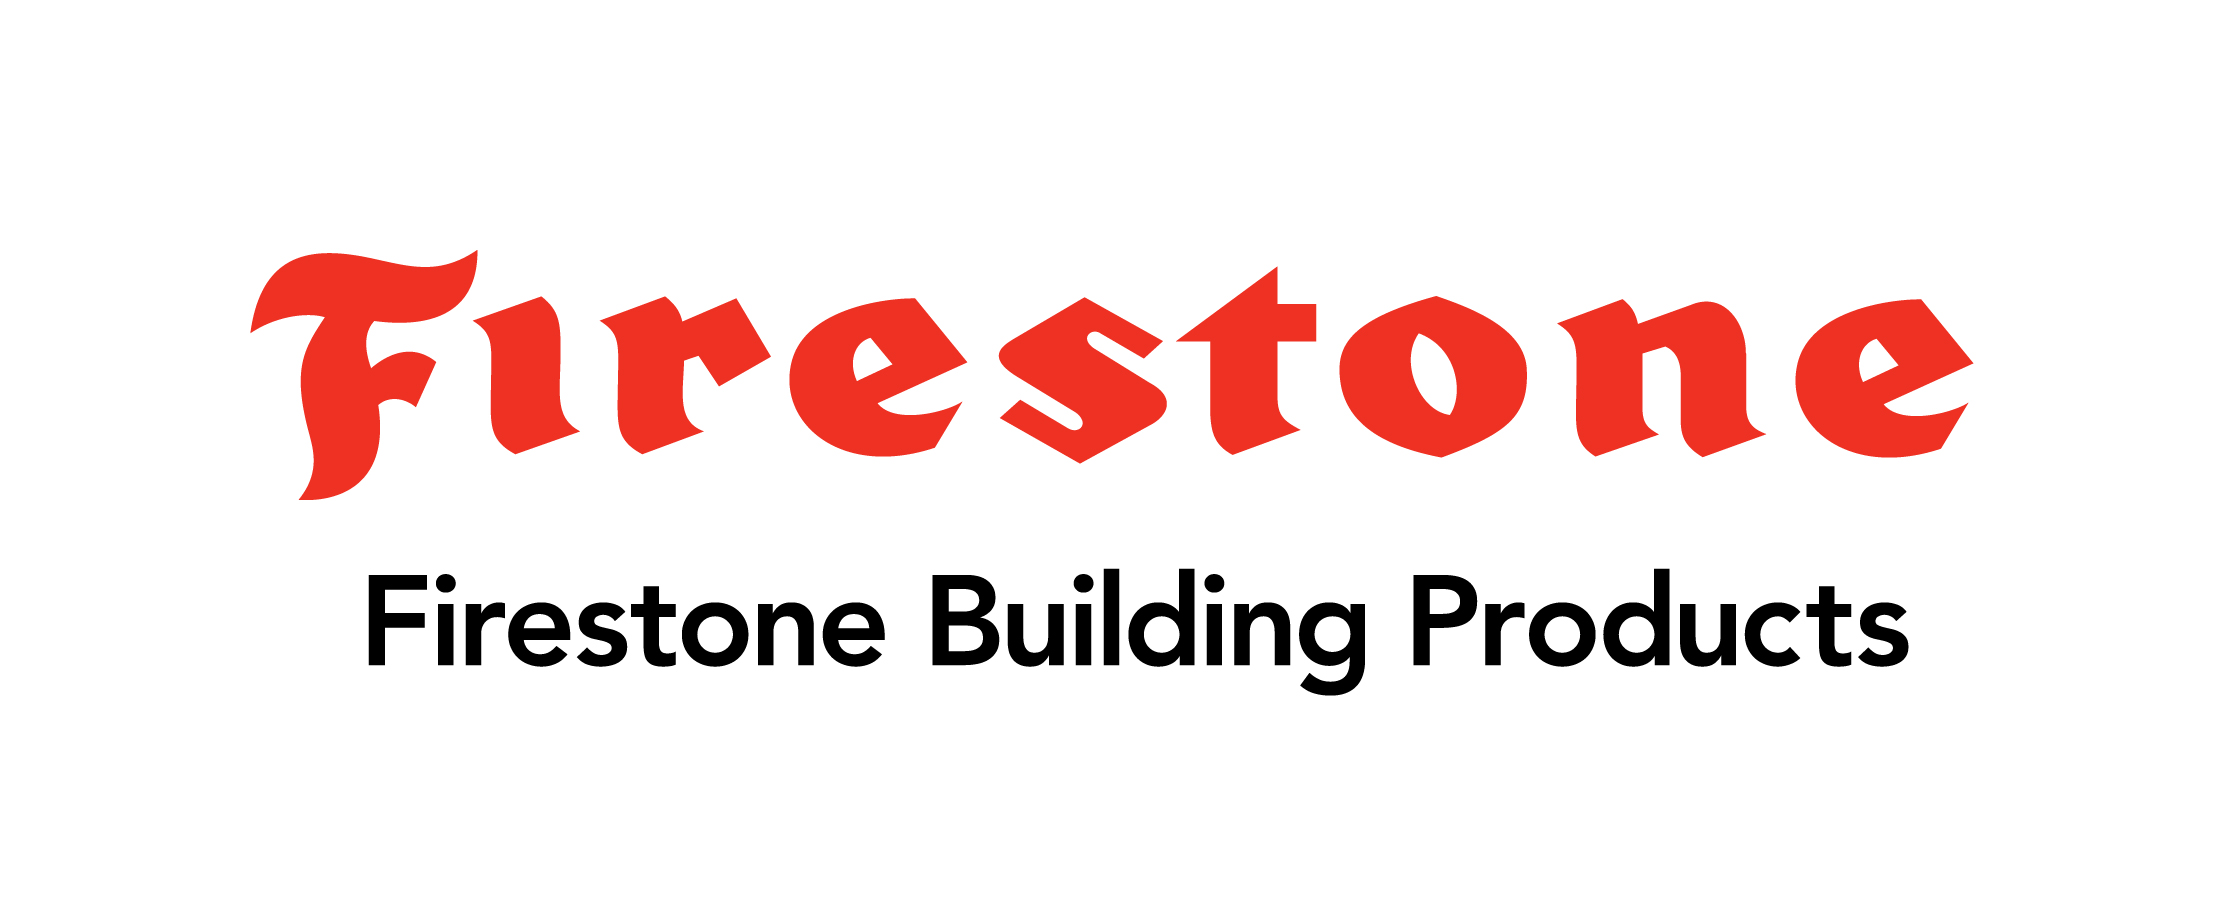 Firestone Joins The Awc Team!